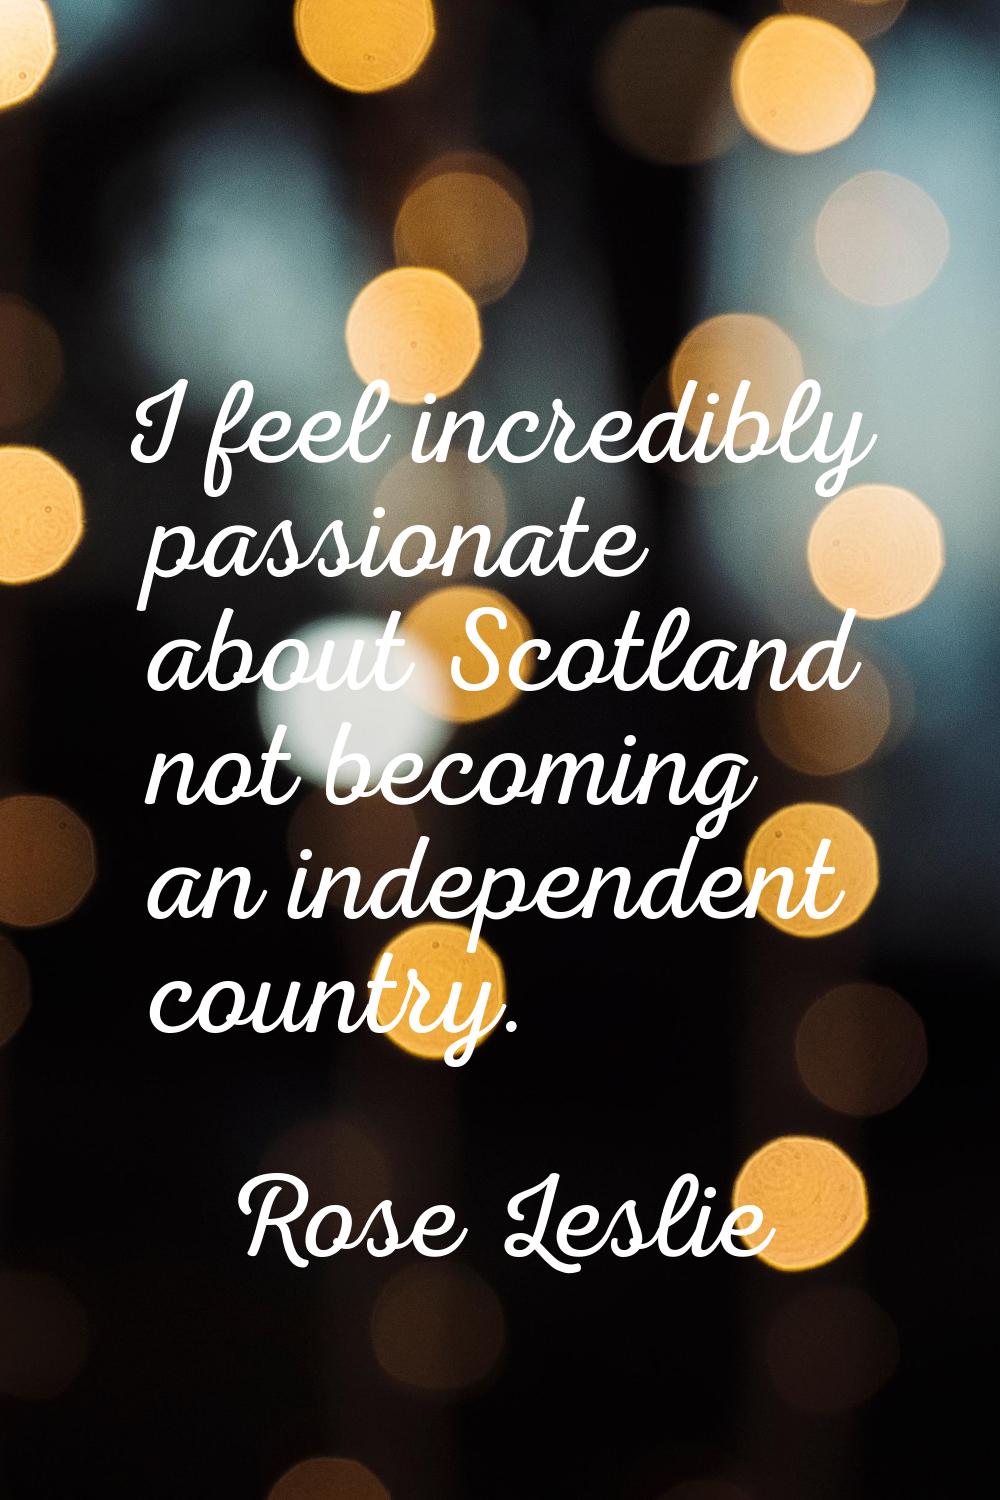 I feel incredibly passionate about Scotland not becoming an independent country.